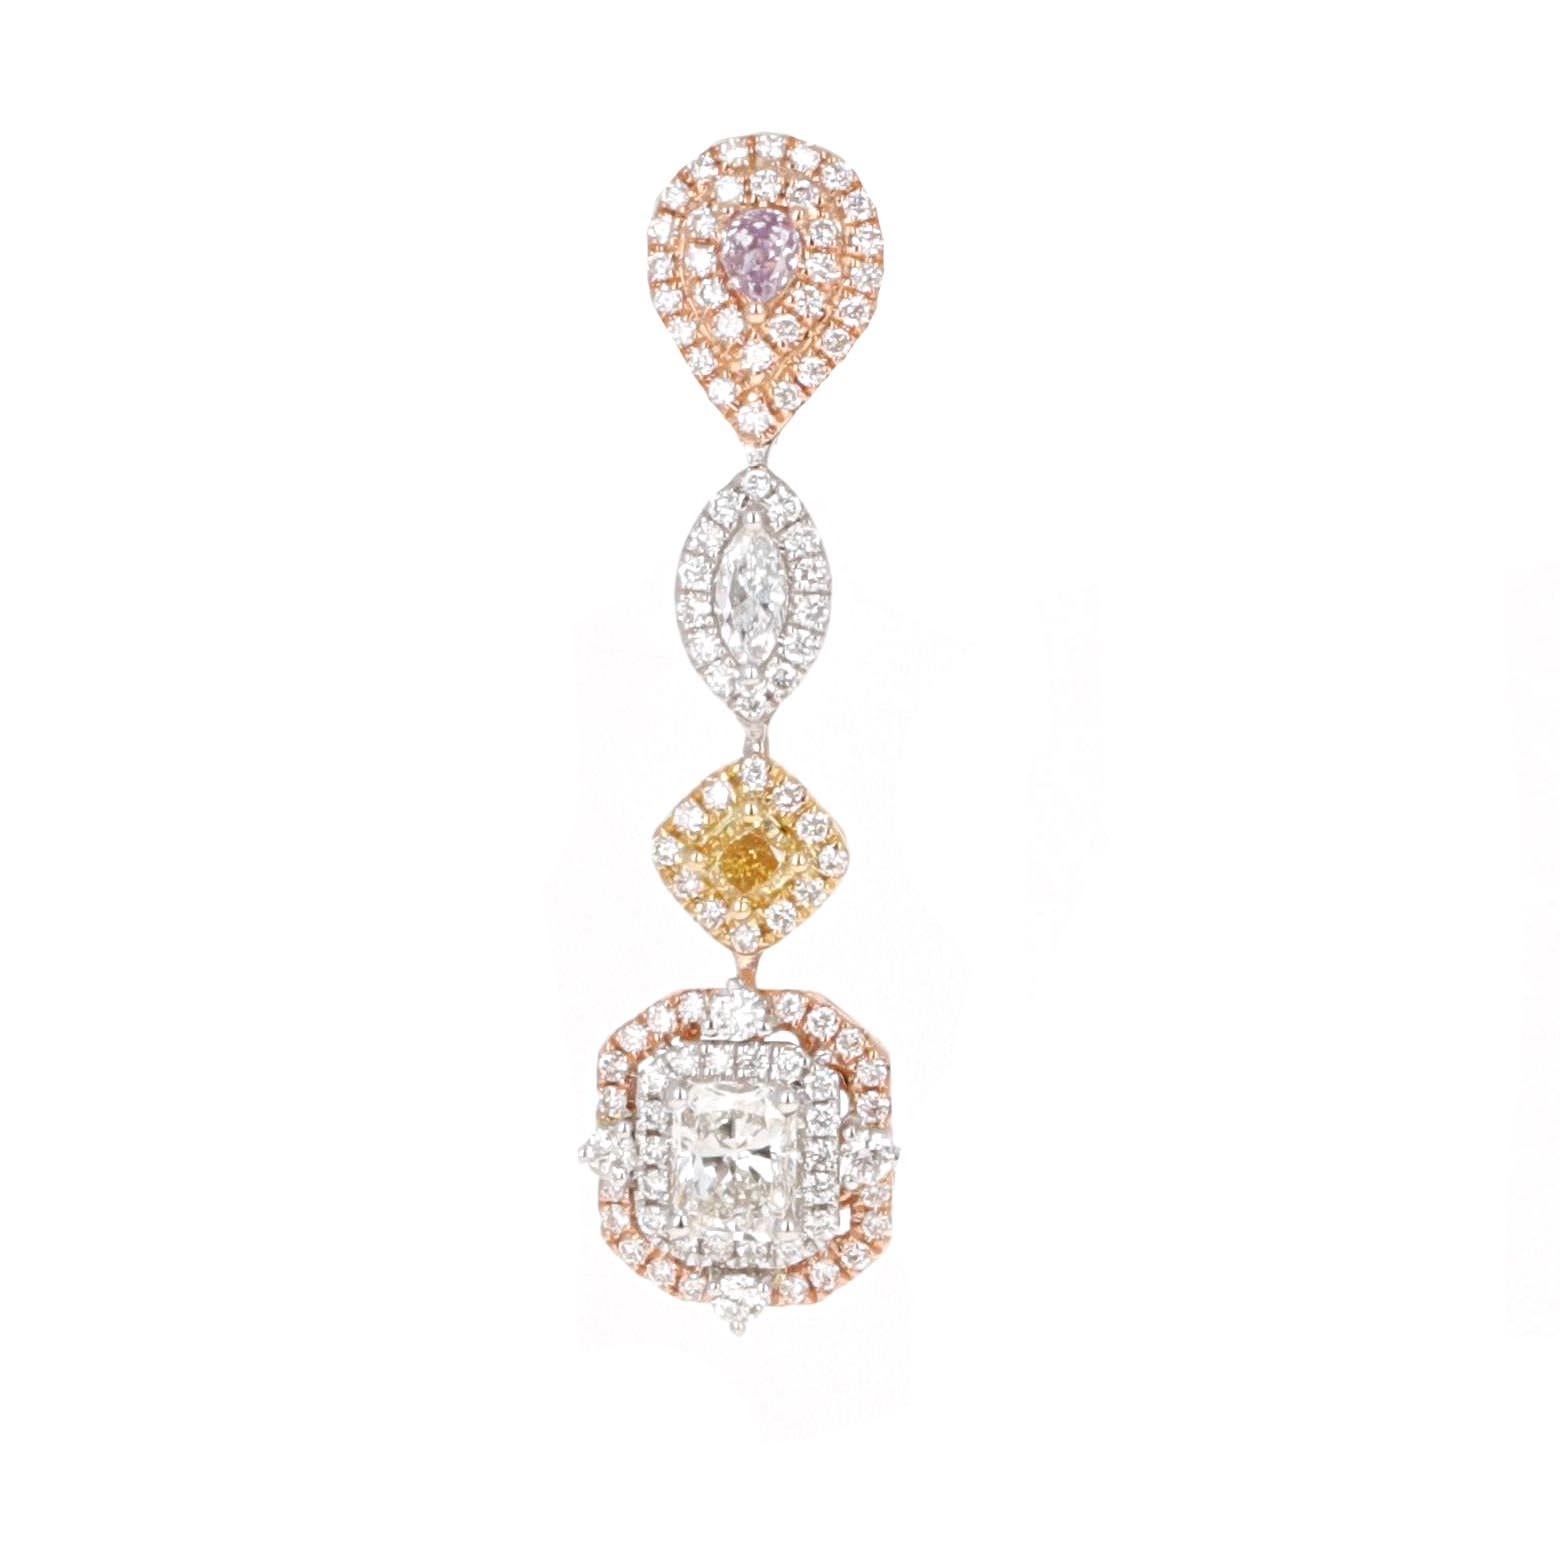 These dangle drop earrings are made with all natural fancy colored diamonds and fancy shaped diamonds. They are very trendy and fashion forward. The colors are very bold and bright. They are made with 18 karat yellow, white and rose gold. 
The total